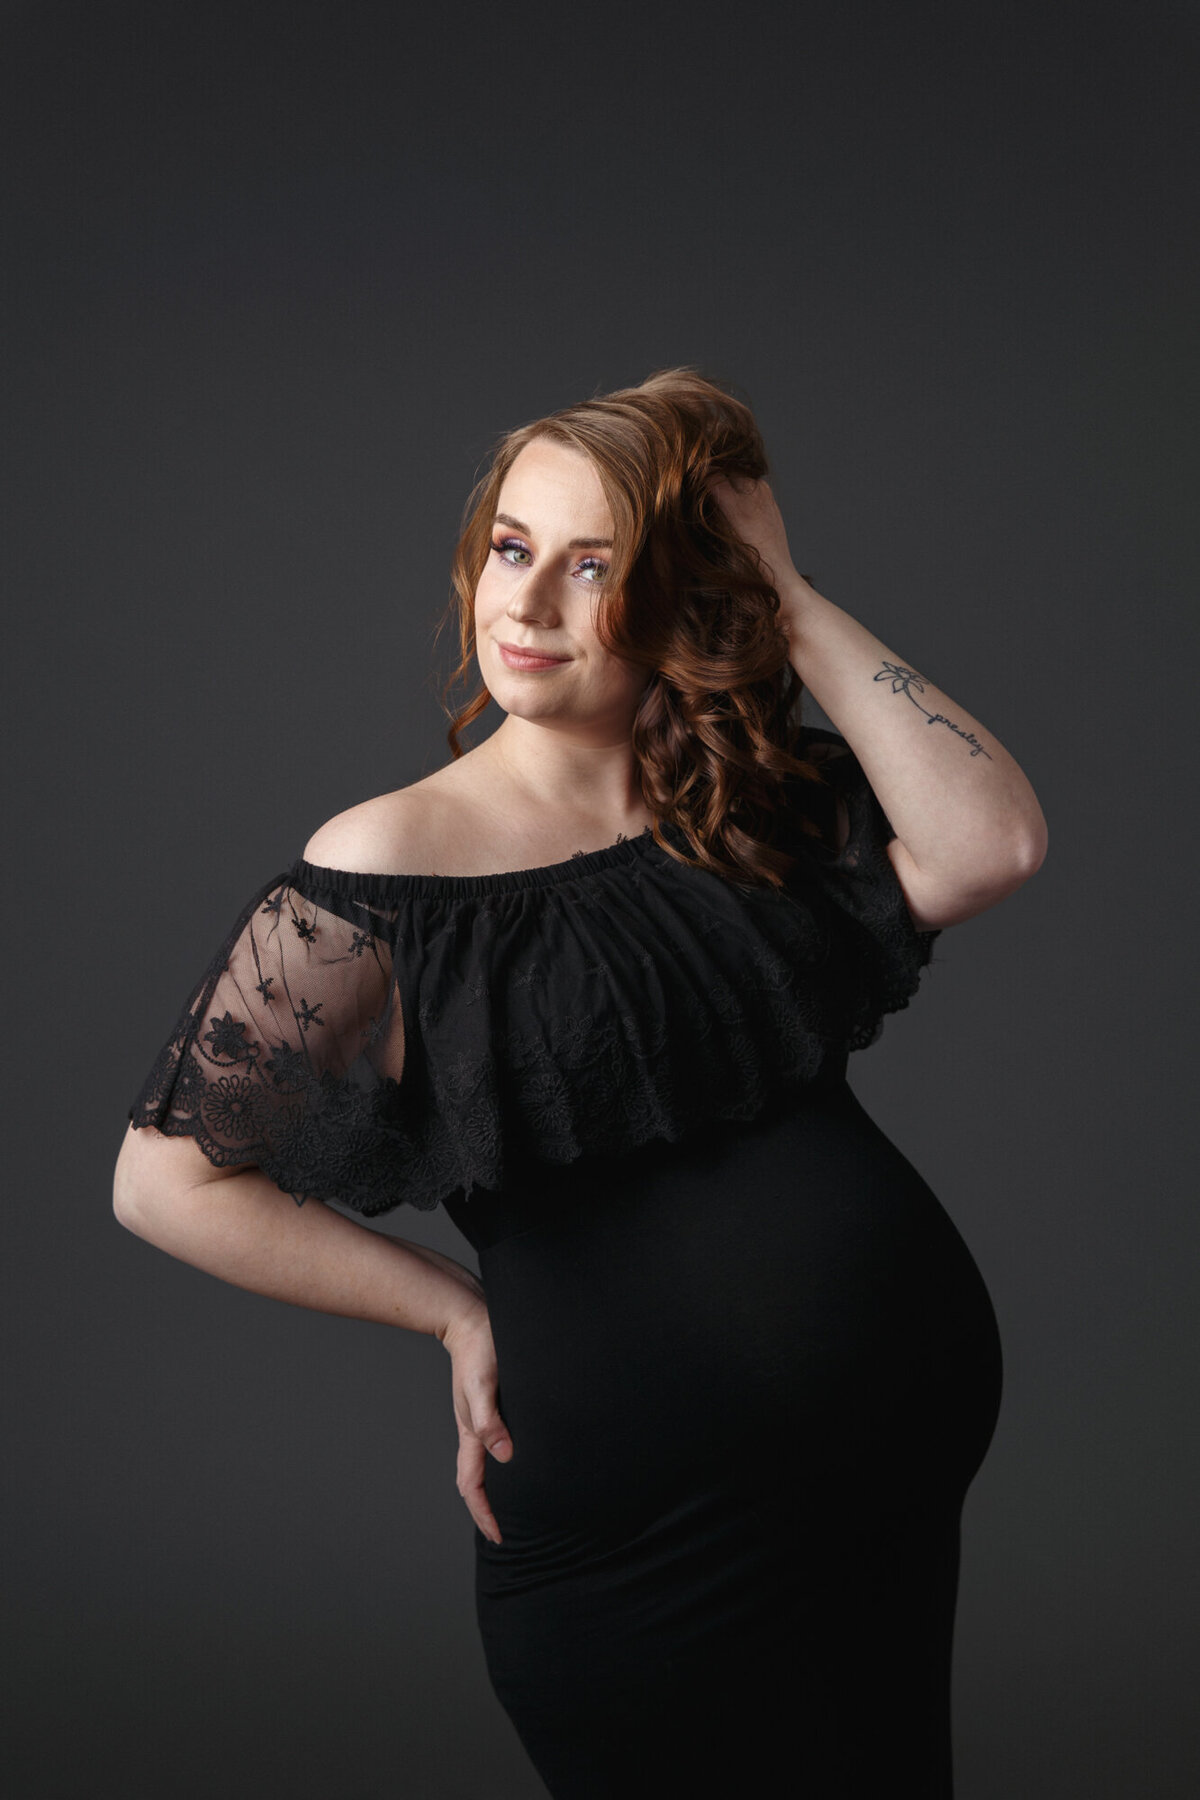 Close up portrait of a pregnant mother to be wearing a black dress with lace slesses against a dark gray background